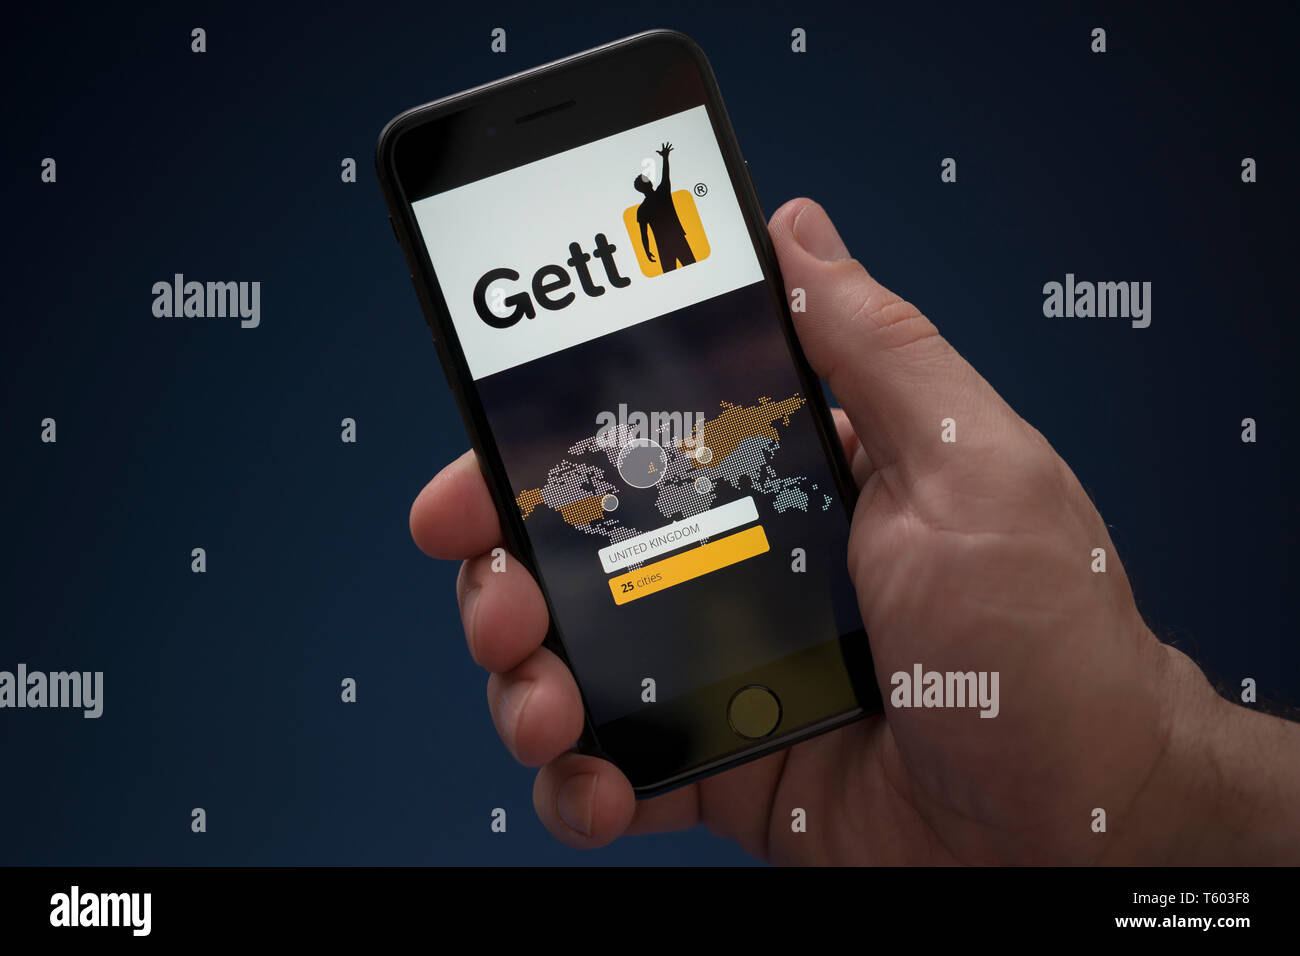 A man looks at his iPhone which displays the Gett logo (Editorial use only). Stock Photo